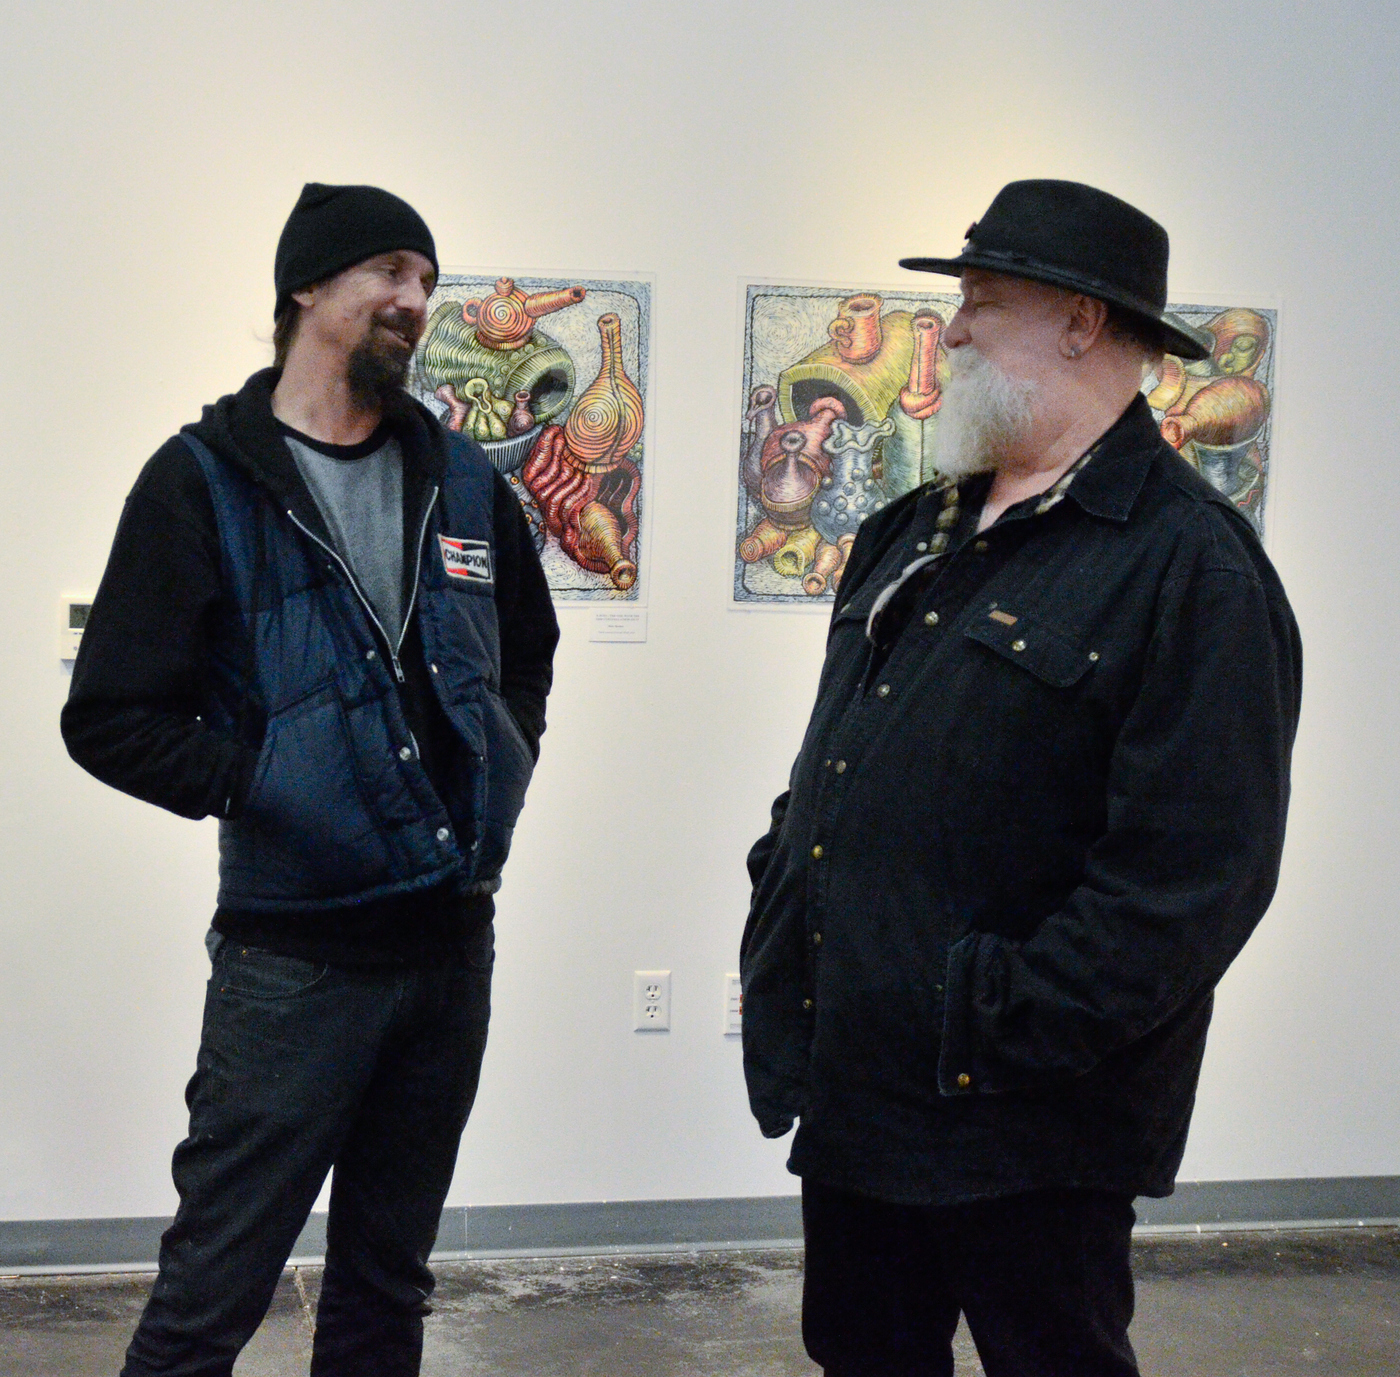 1- 21-16 Bruce Gosset, left, chatting with Mick Sheldon, right, the artist whose work is currently being displayed. Chris Williams, Staff Photographer. | Chriswexpress@gmail.com